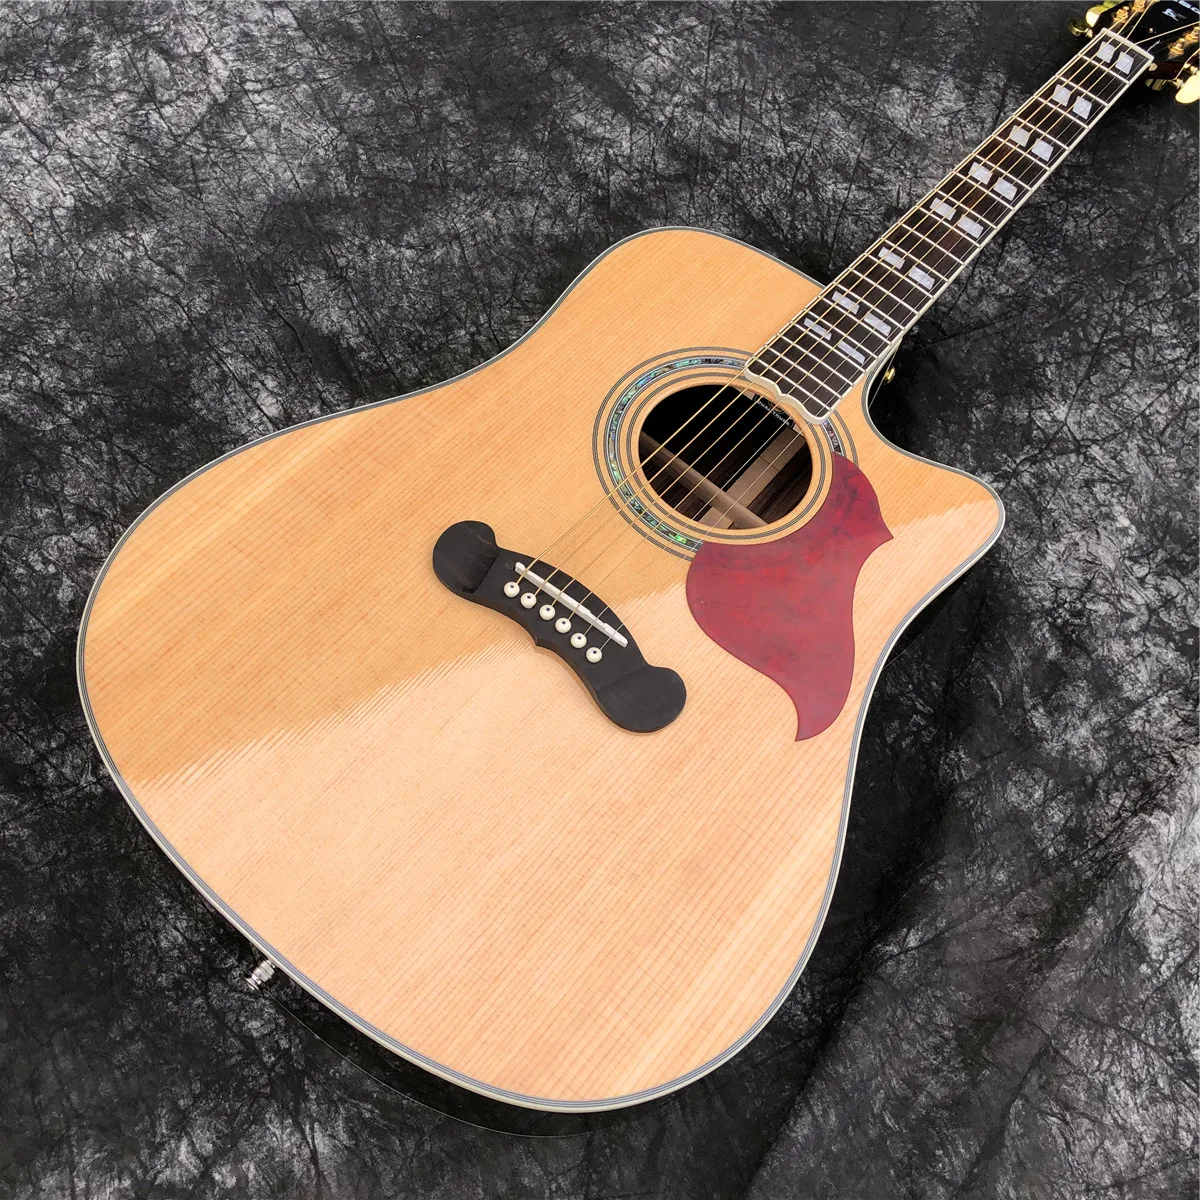 

Cutaway Songwriter Acoustic Guitar Solid Spruce Top Studio Deluxe Electric Guitar Free Shipping